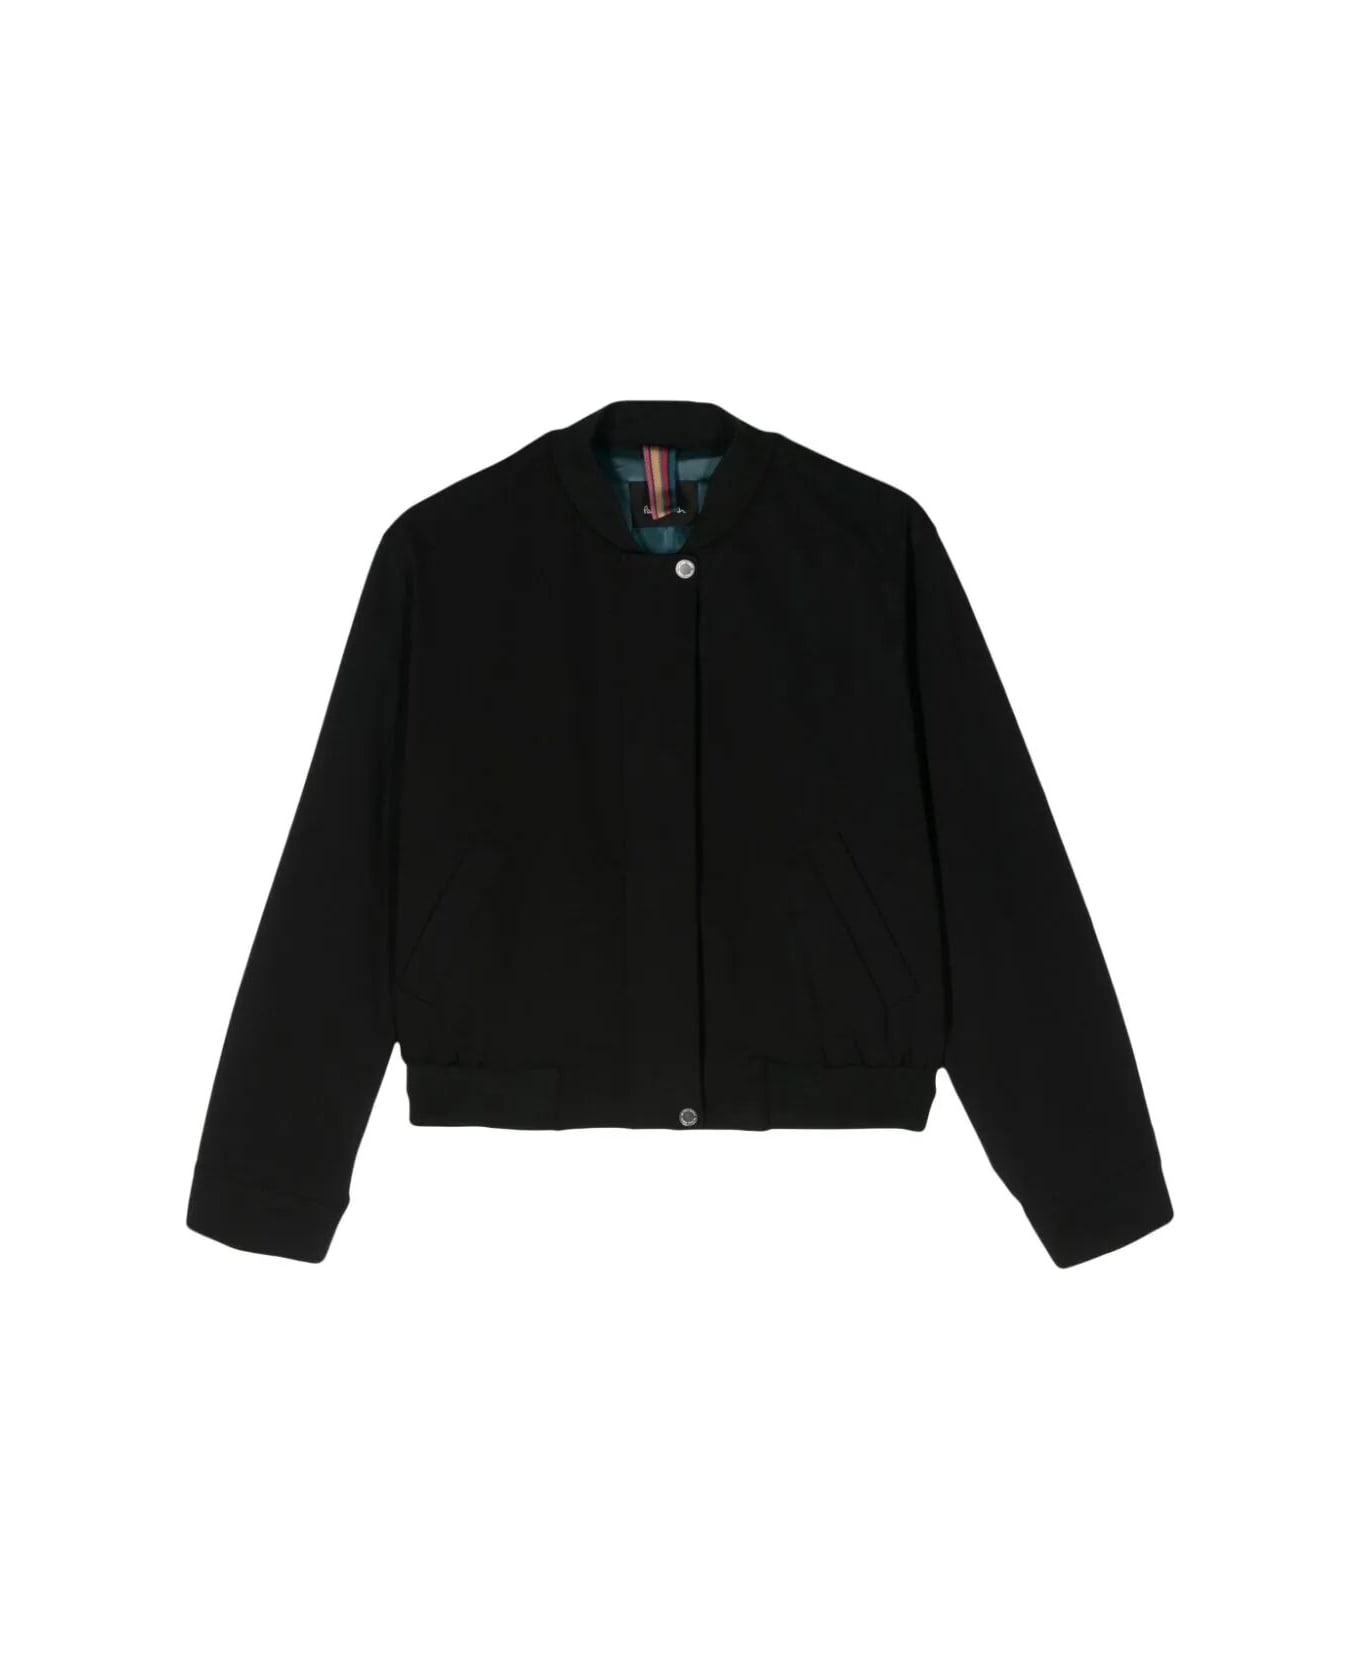 PS by Paul Smith Jacket - Black